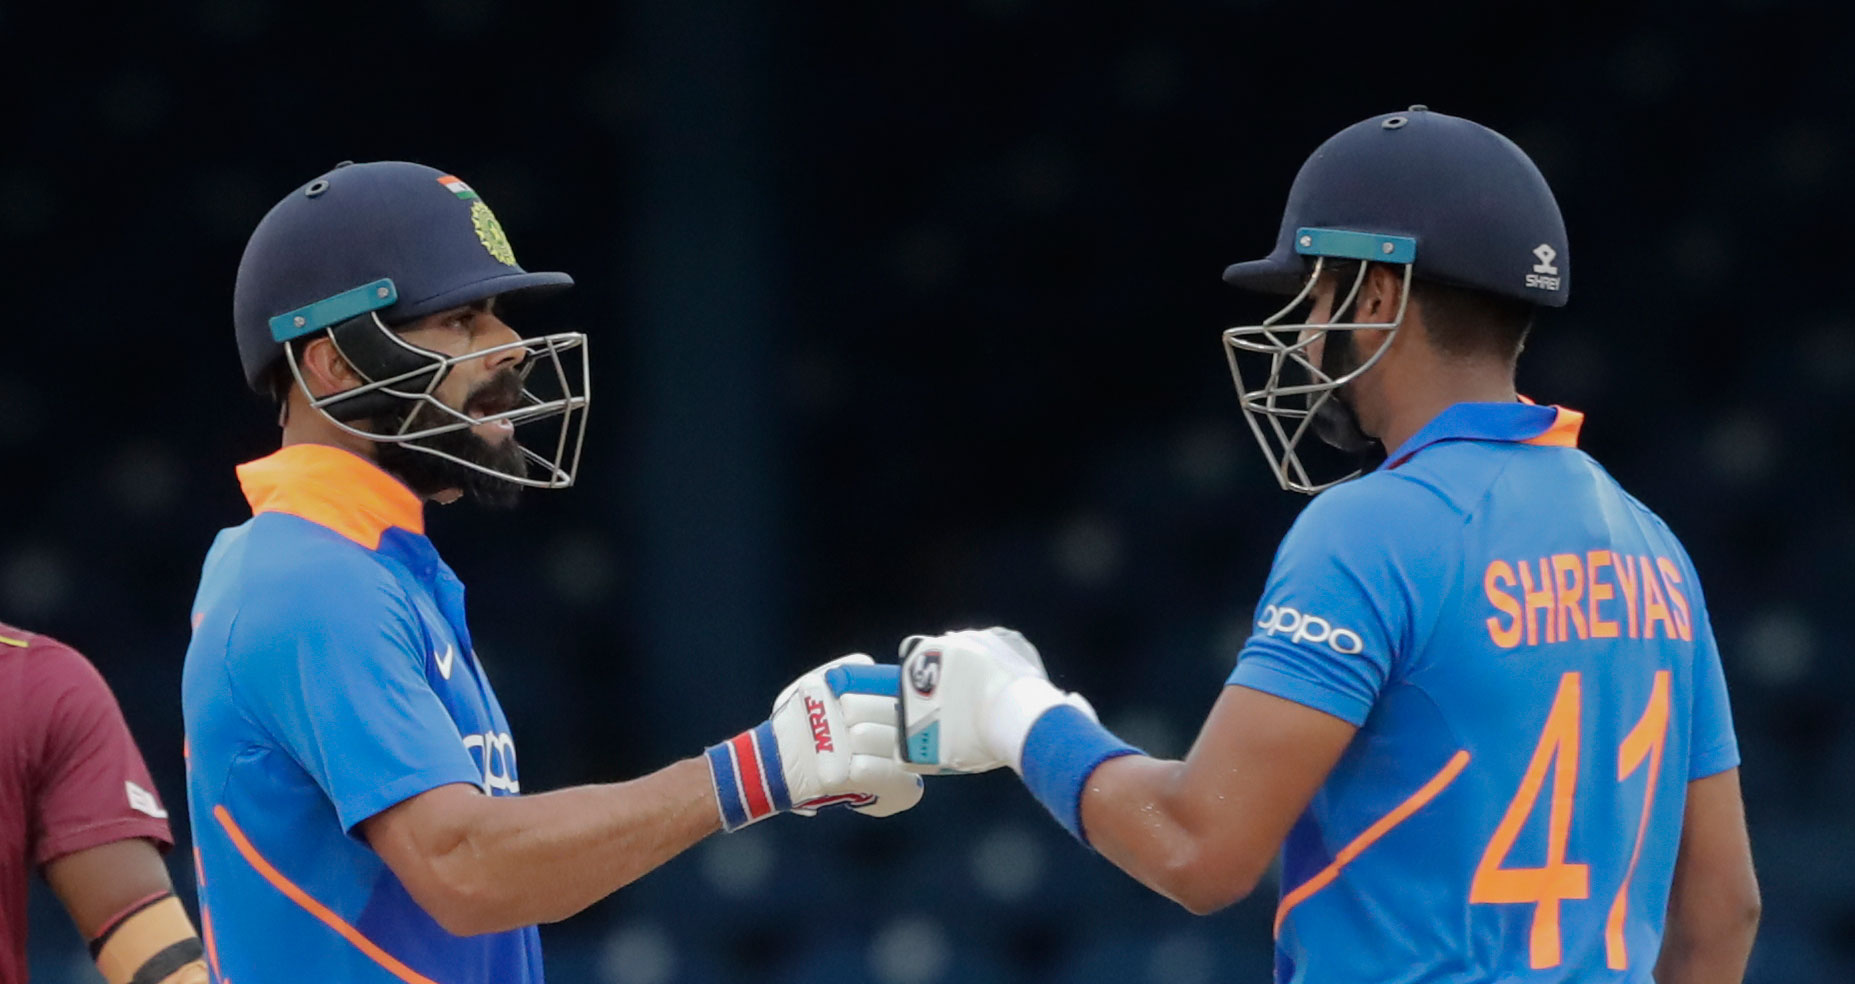 Virat Kohli with Shreyas Iyer during their third One-Day International cricket match against West Indies in Port of Spain, Trinidad, on August 14, 2019.
